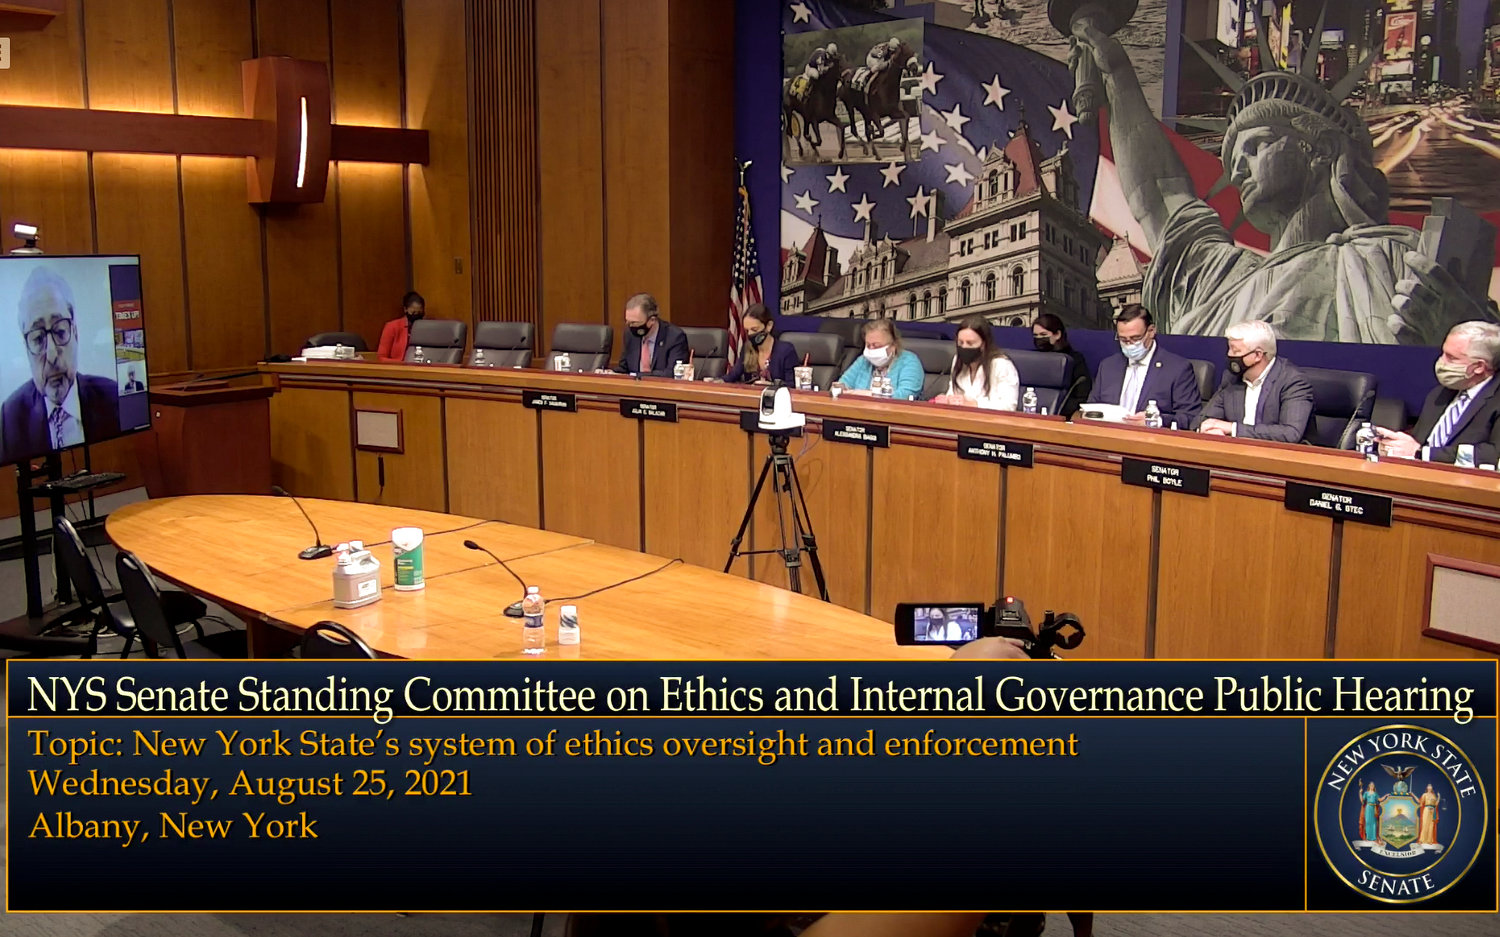 State Sen. Alessandra Biaggi held a hearing late last month to gather testimony about the alleged issues with the Joint Commission on Public Ethics, the state’s ethics watchdog. Biaggi sponsored a bill seeking to reform JCOPE by changing how it vote and how its commissioners are appointed.